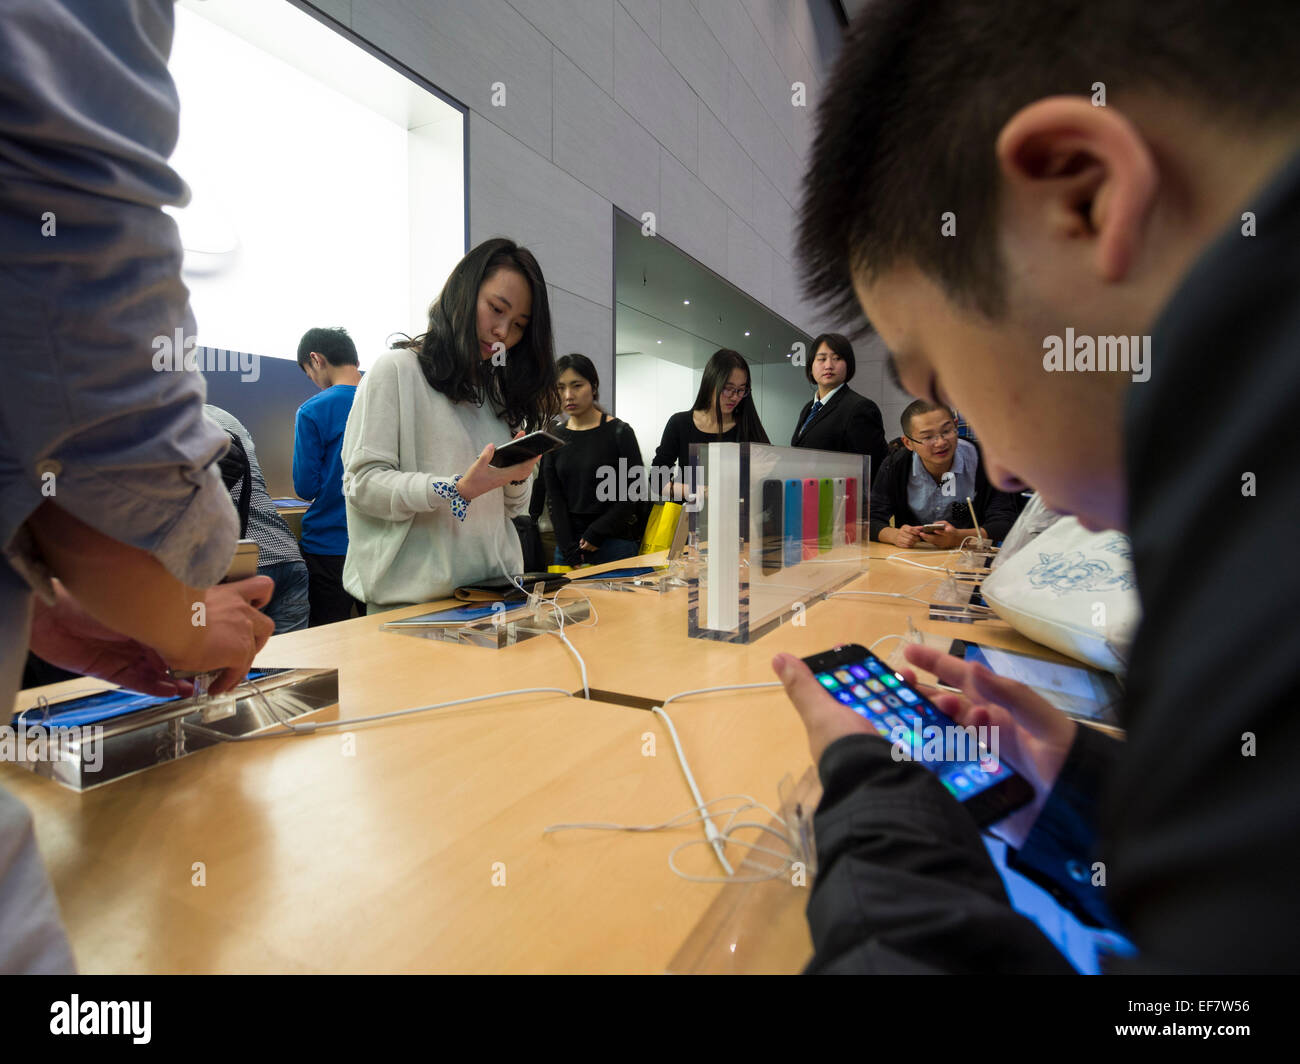 Costumers browsing Apple products at the Apple store located on Nanjing Road in Shanghai, China Stock Photo